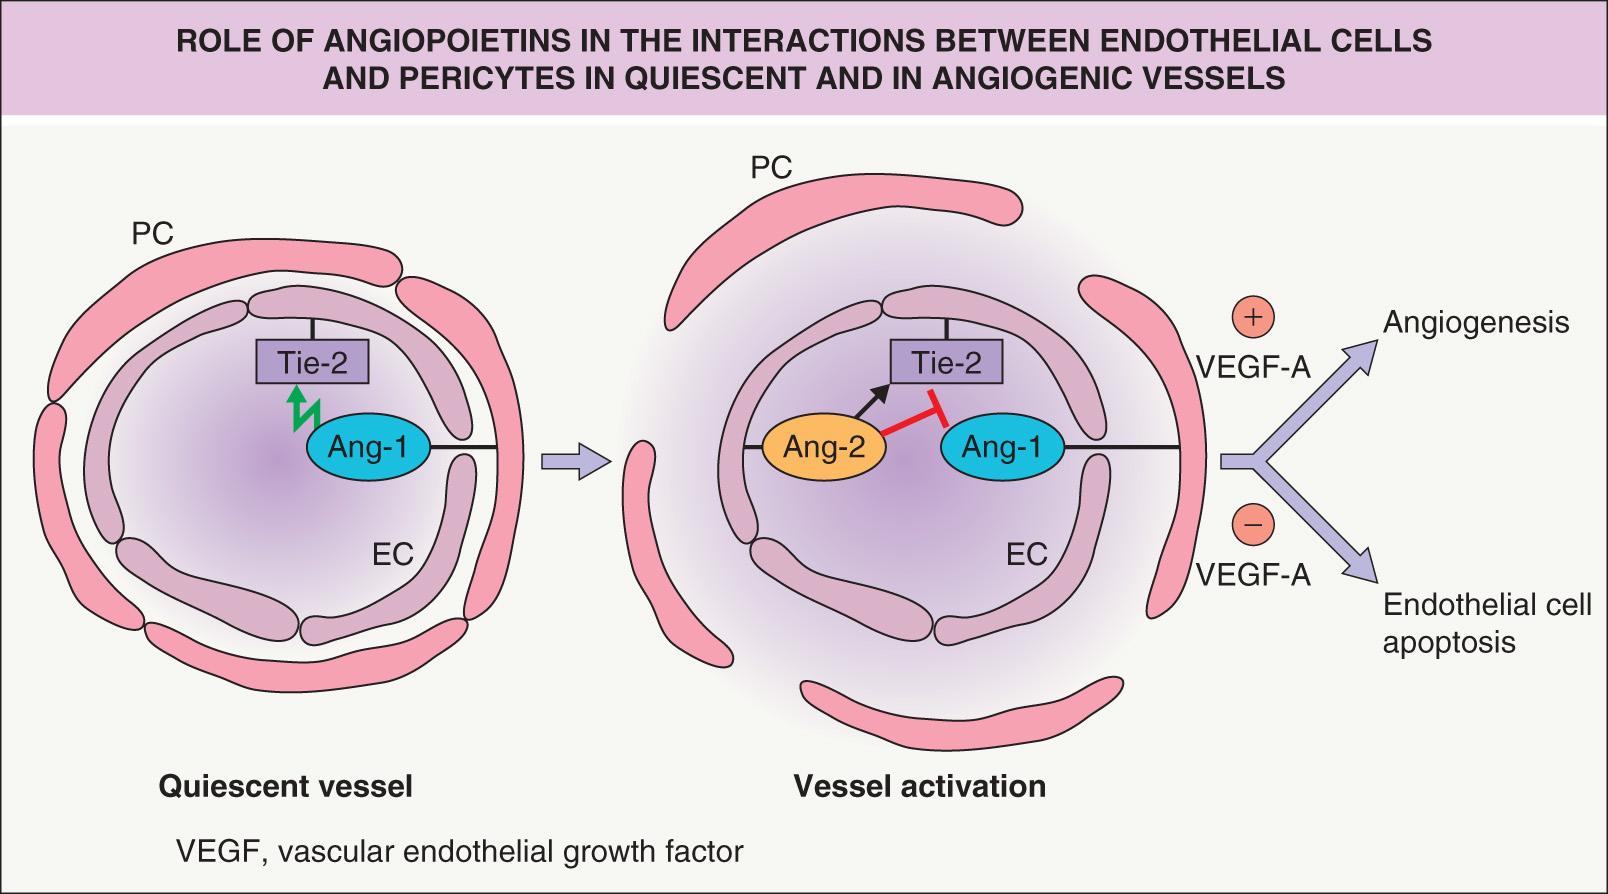 Fig. 102.8, Role of angiopoietins in the interactions between endothelial cells and pericytes in quiescent and in angiogenic vessels.